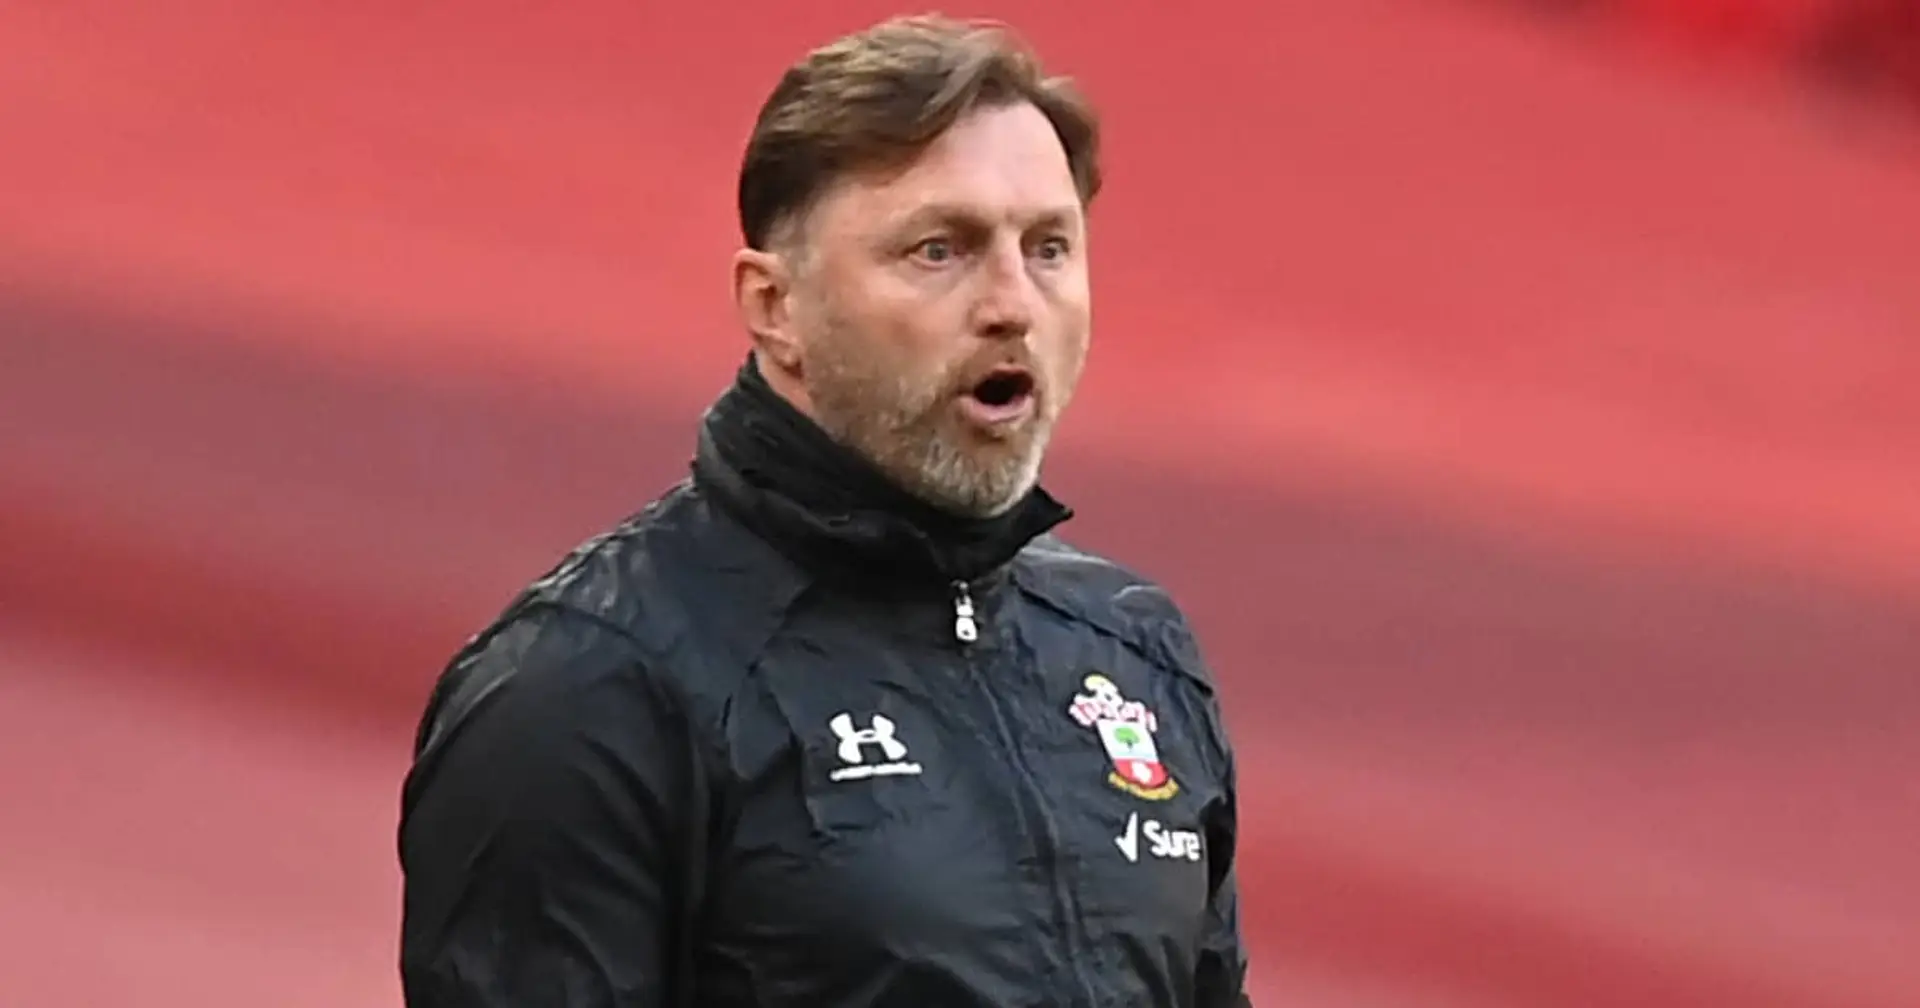 'I see a war coming up': Saints boss Hasenhuttl hits out at Premier League's 'big 6' over Super League